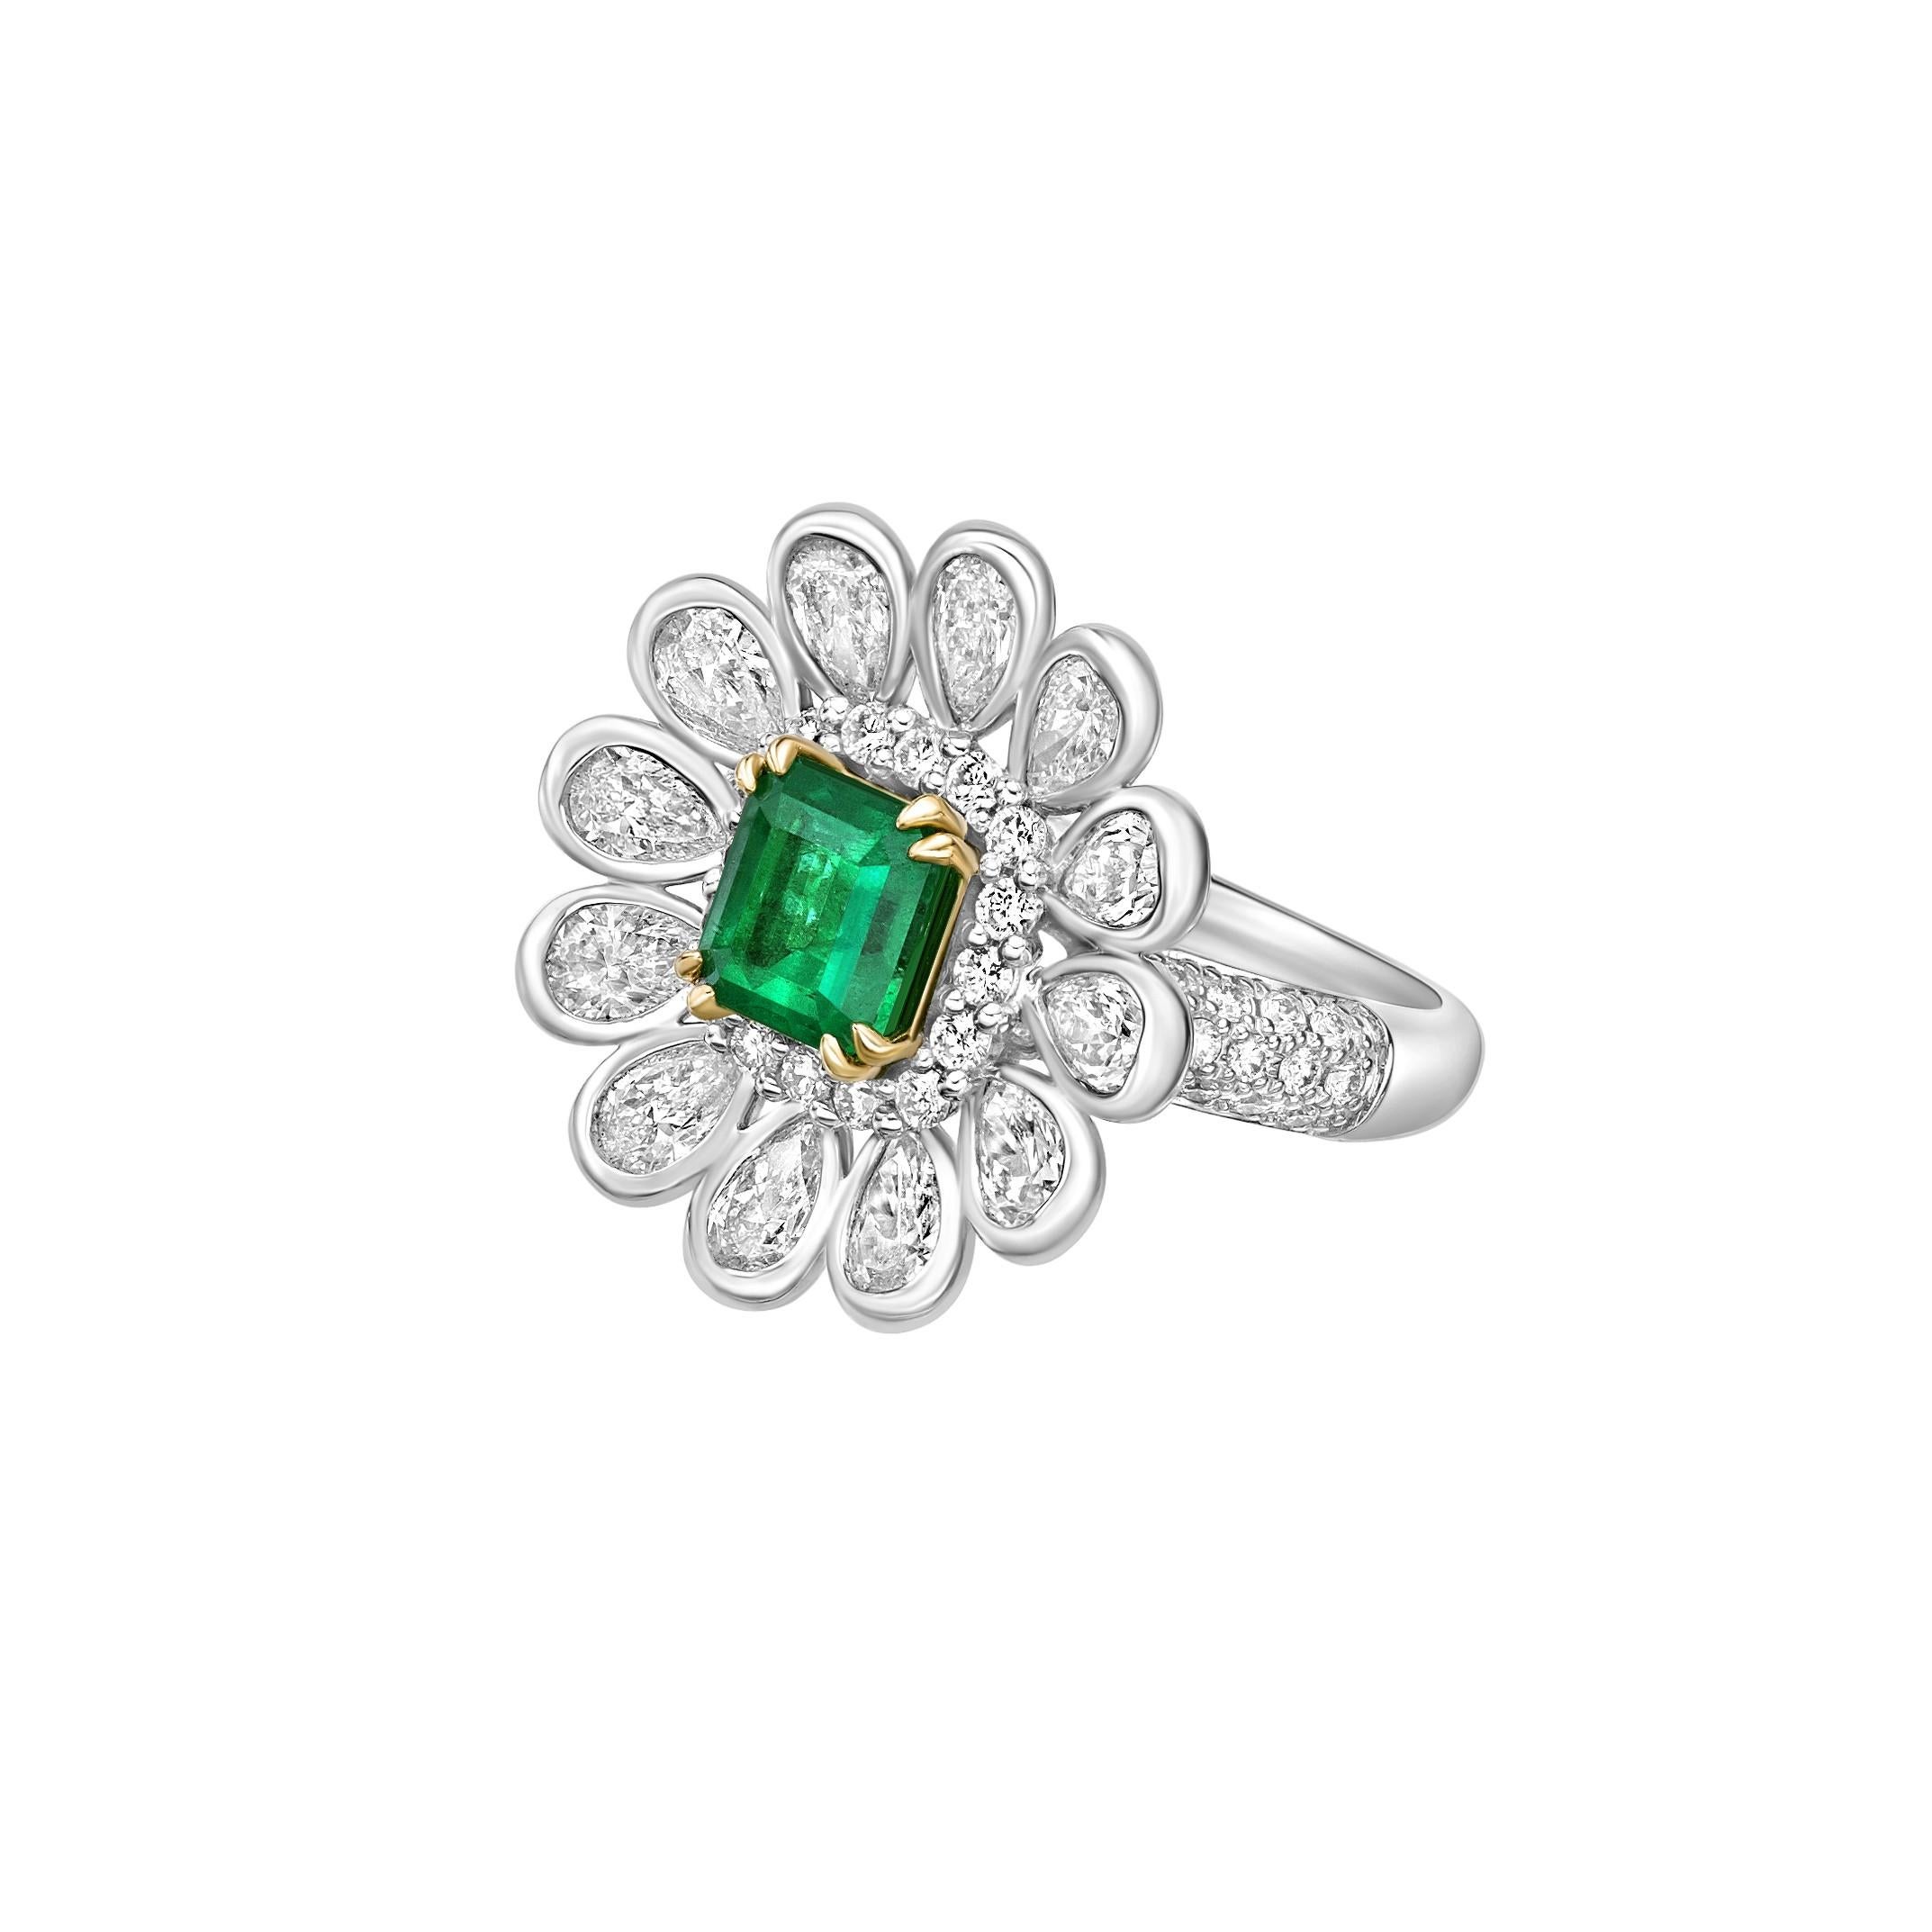 Octagon Cut 1.15 Carat Sunfiower Emerald Bridal Ring in 18KWYG with White Diamond. For Sale